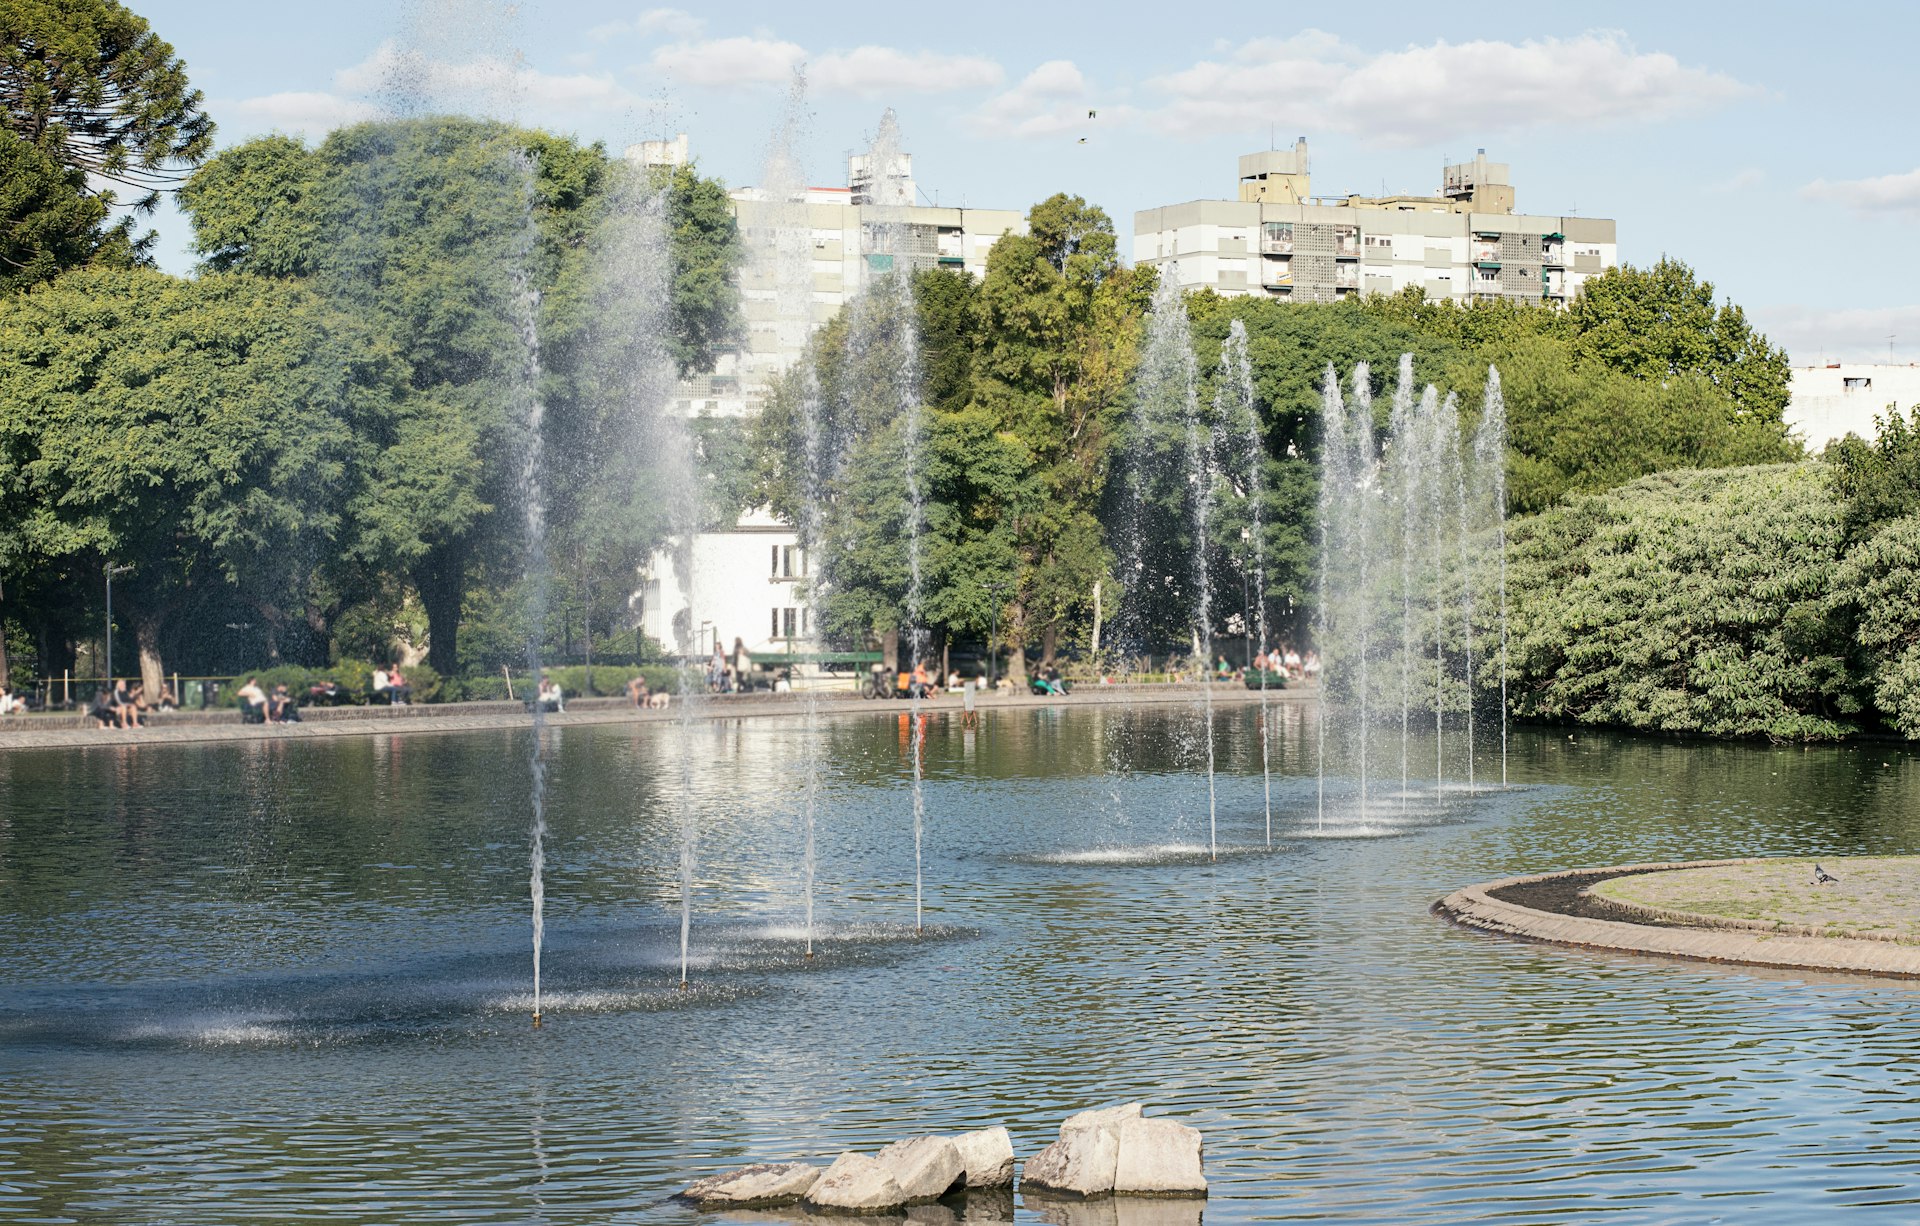 A large artificial lake with fountains; people are milling around in the surrounding park